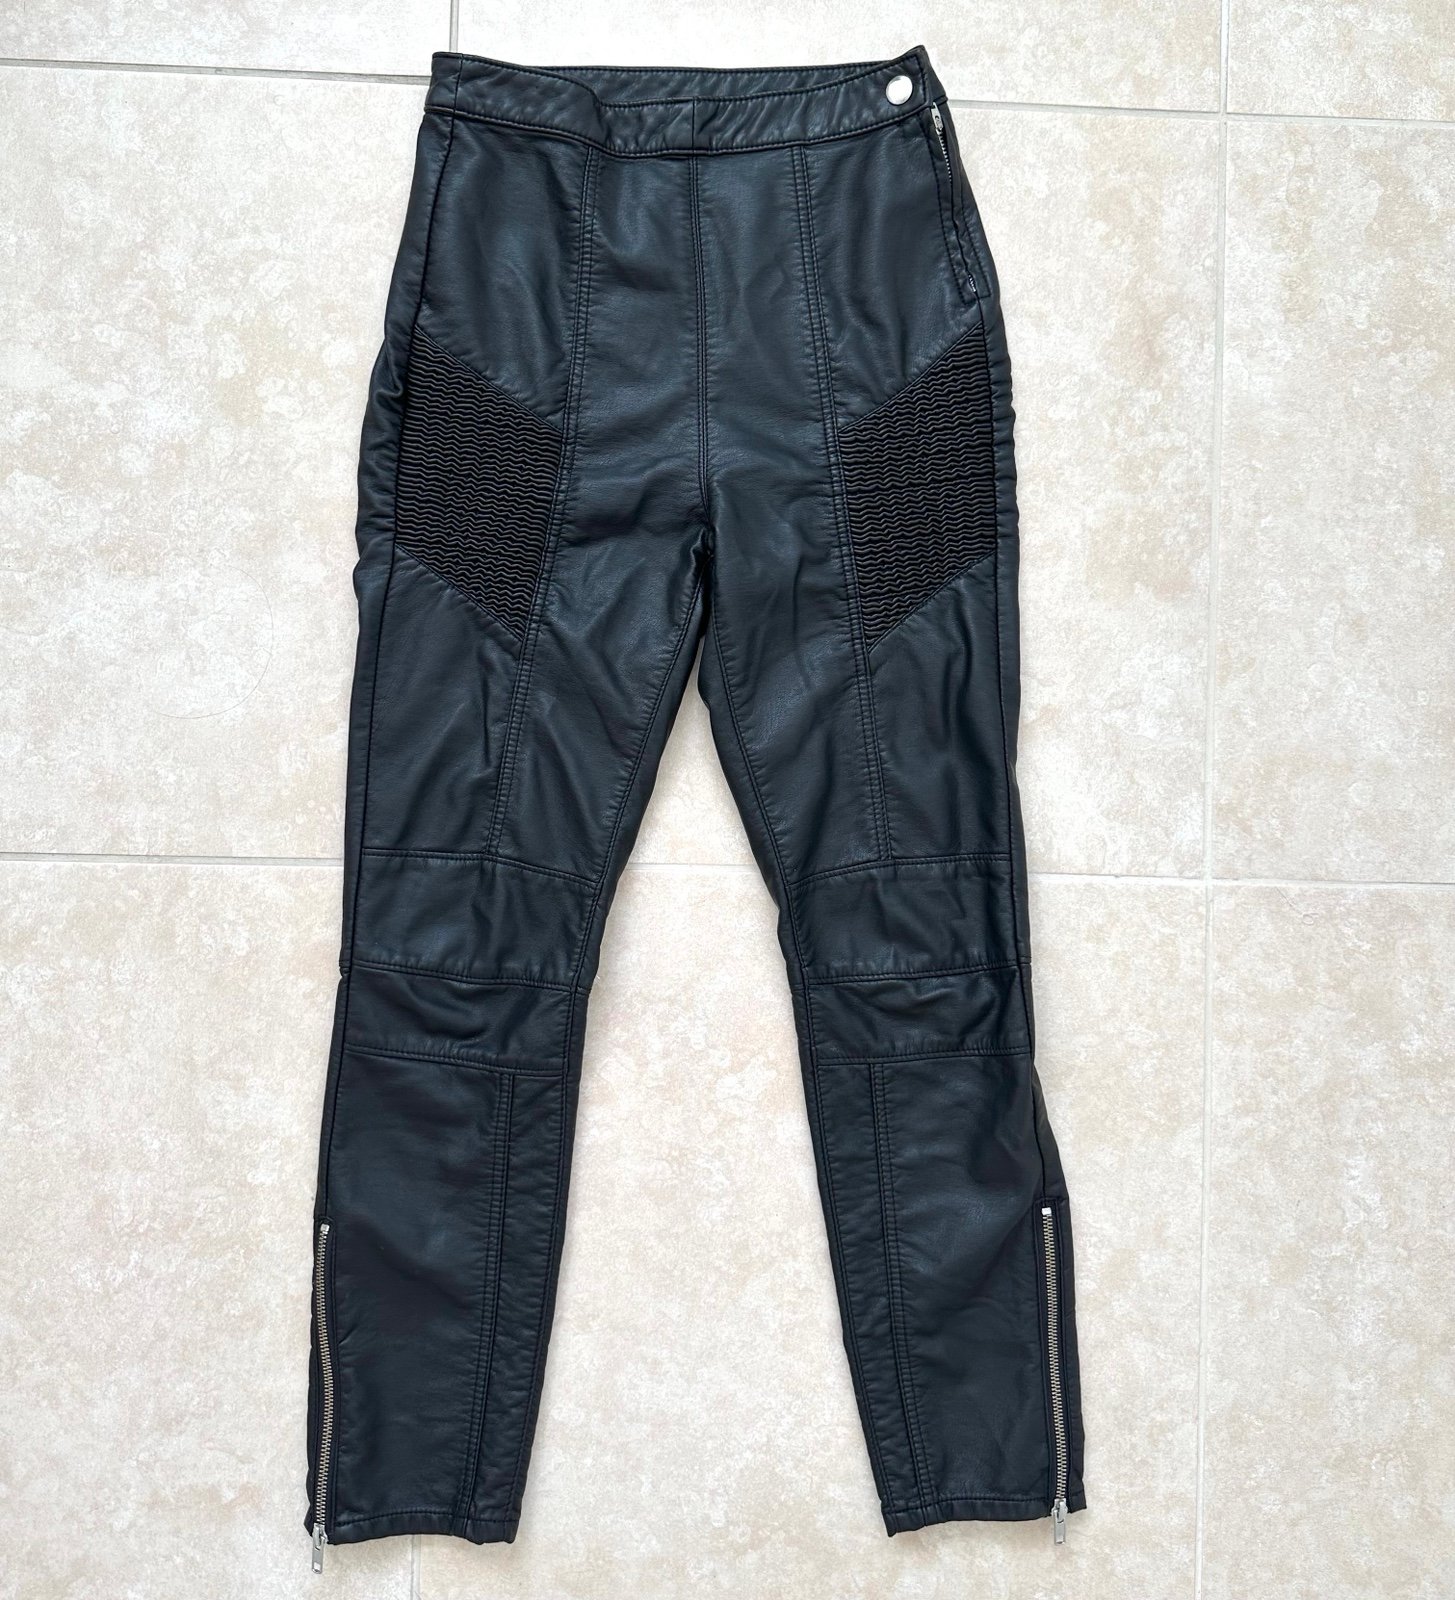 Promotions  Free People Kaelin Faux Leather High Waisted Moto Skinny Pants OzESMh3iy all for you